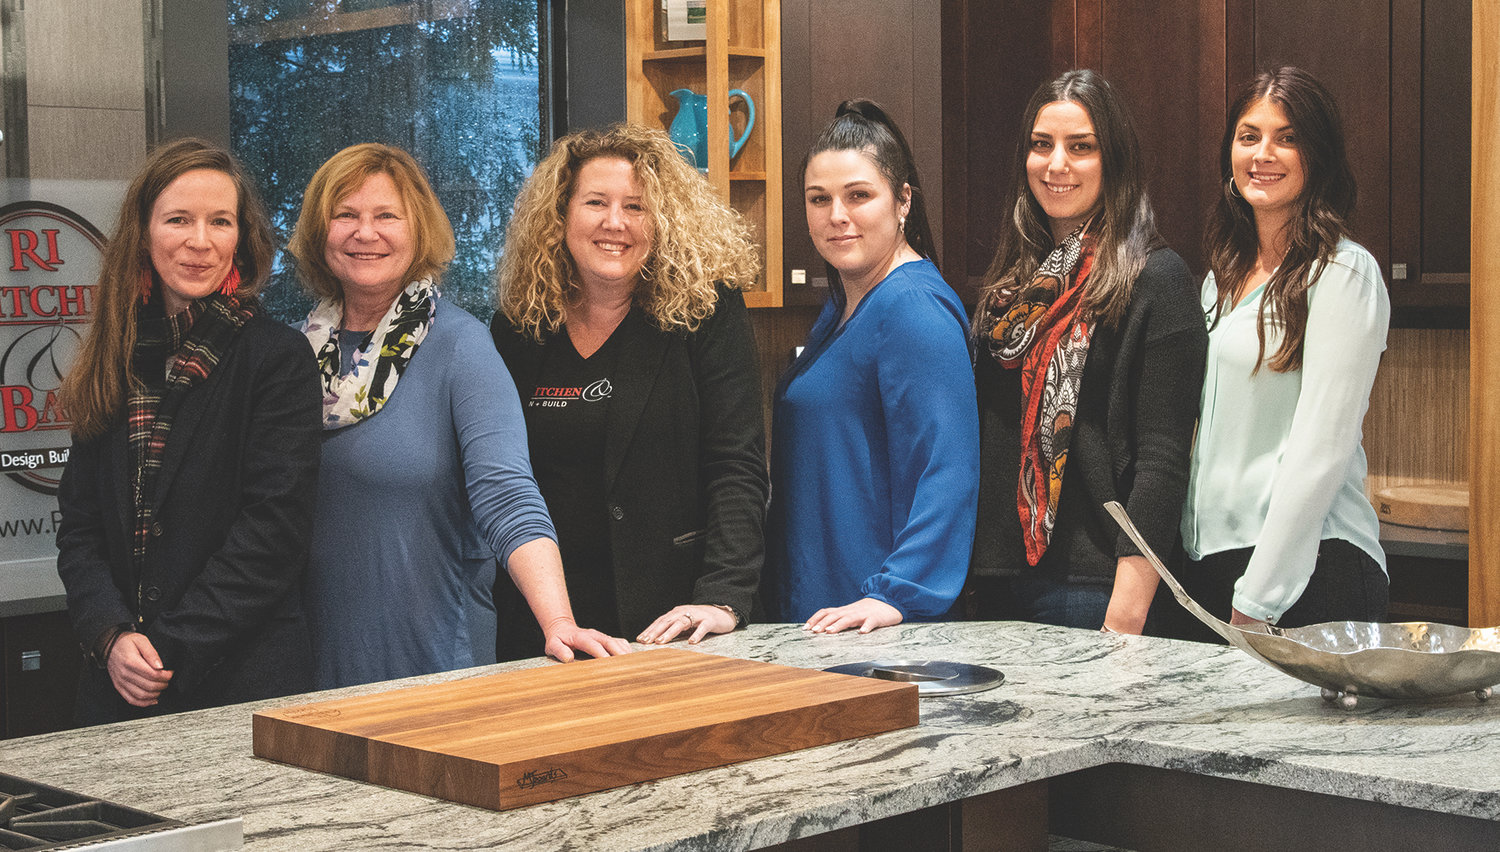 Leading Ladies of The Design + Build Team at RI Kitchen & Bath in Warwick, left to right: Erika Pearson, Prudence Stoddard, Tanya Donahue, Billie Senzek, Kingsley Catalucci, and Stephanie McShane